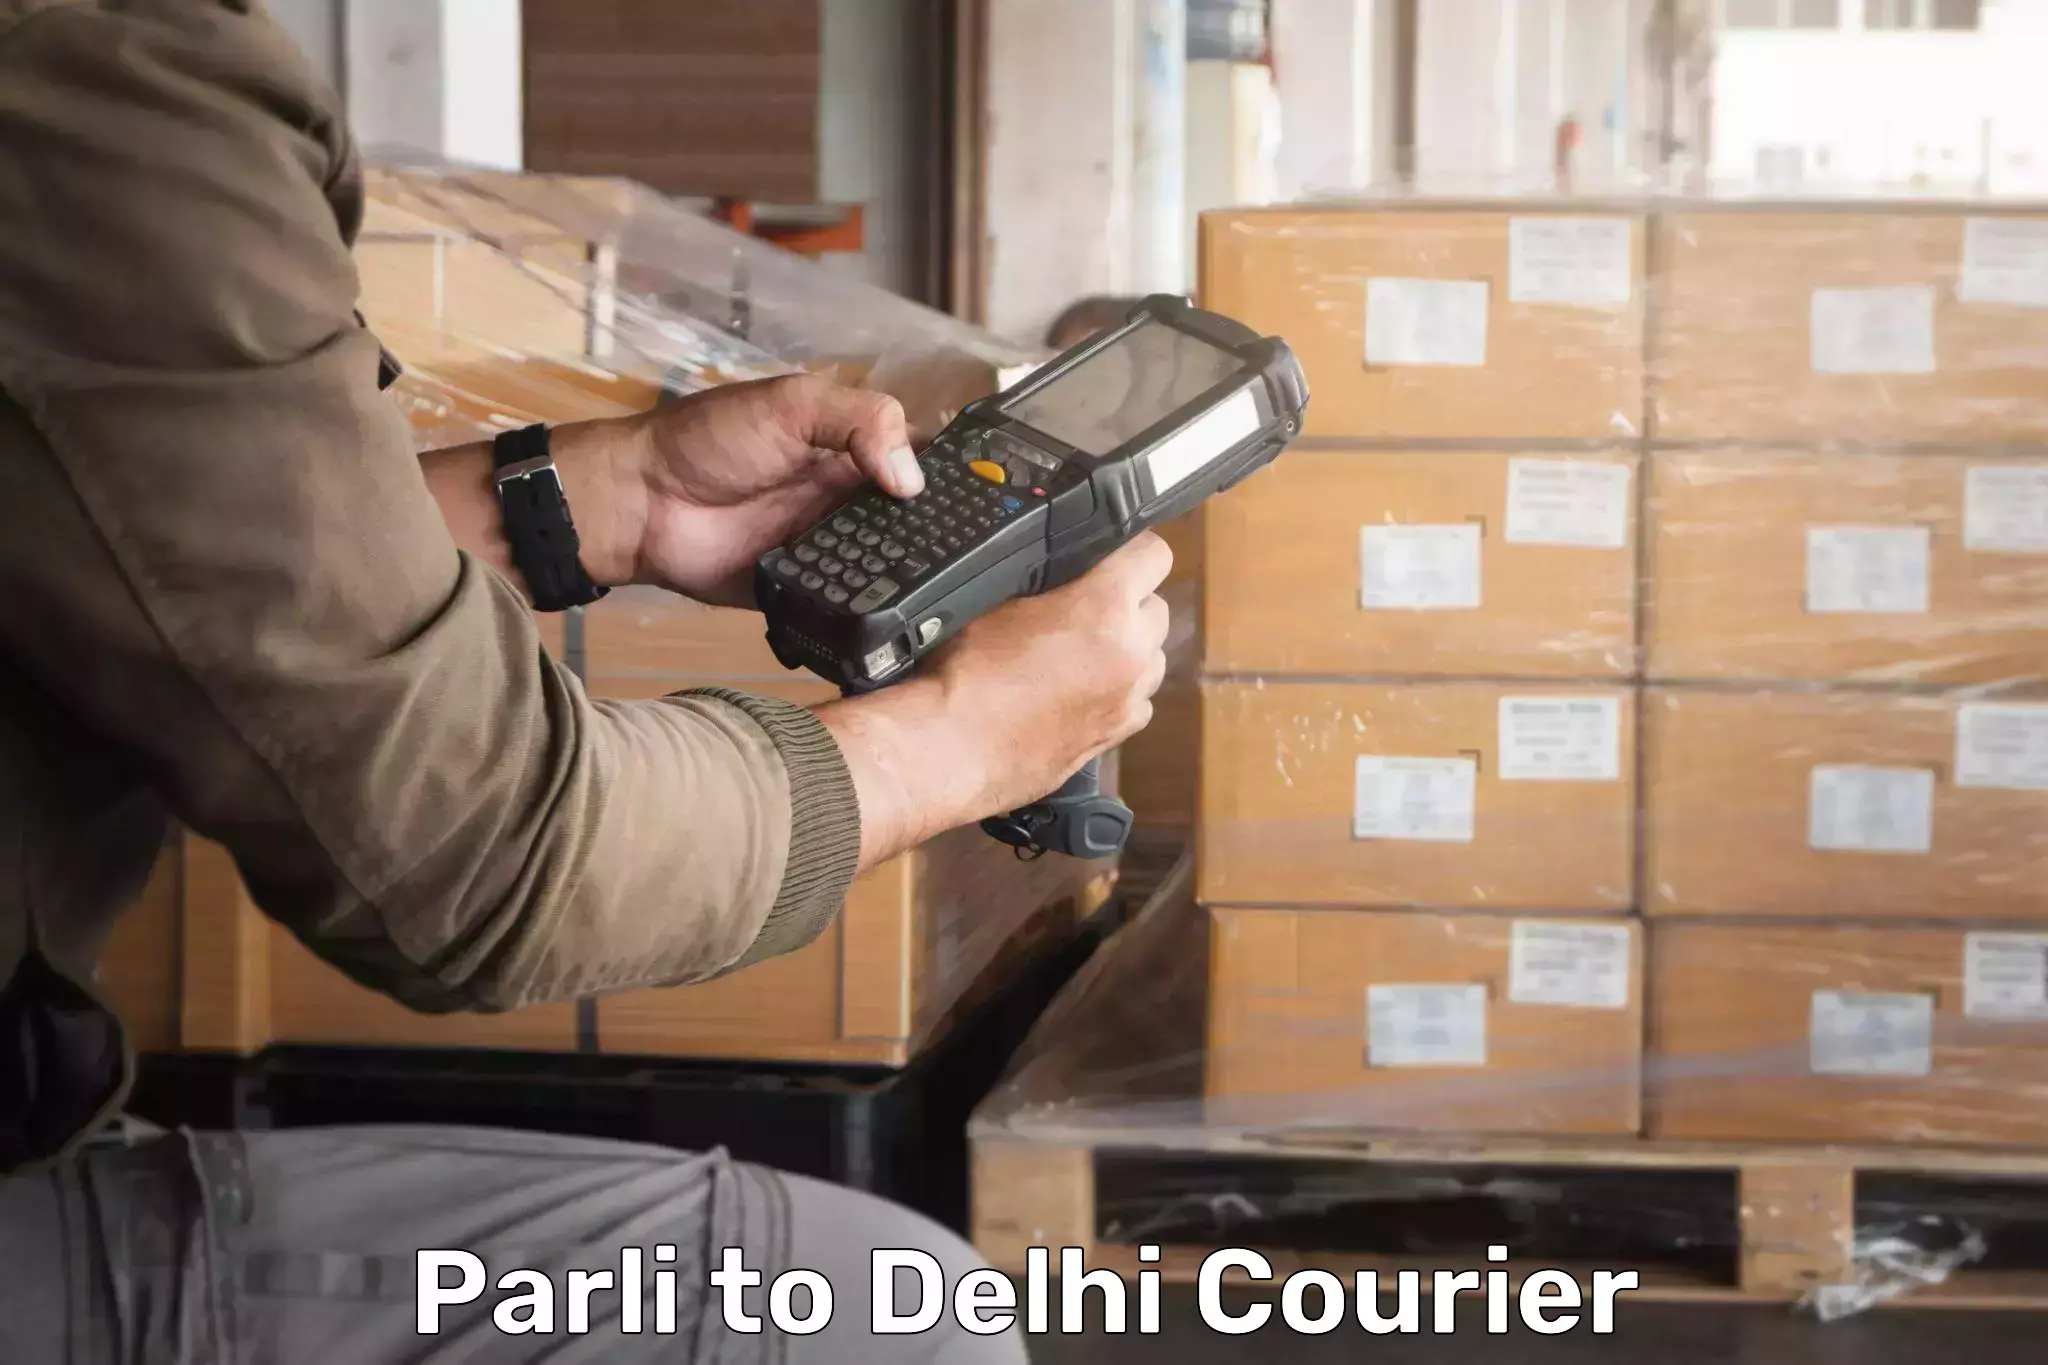 Fragile item shipping Parli to Lodhi Road